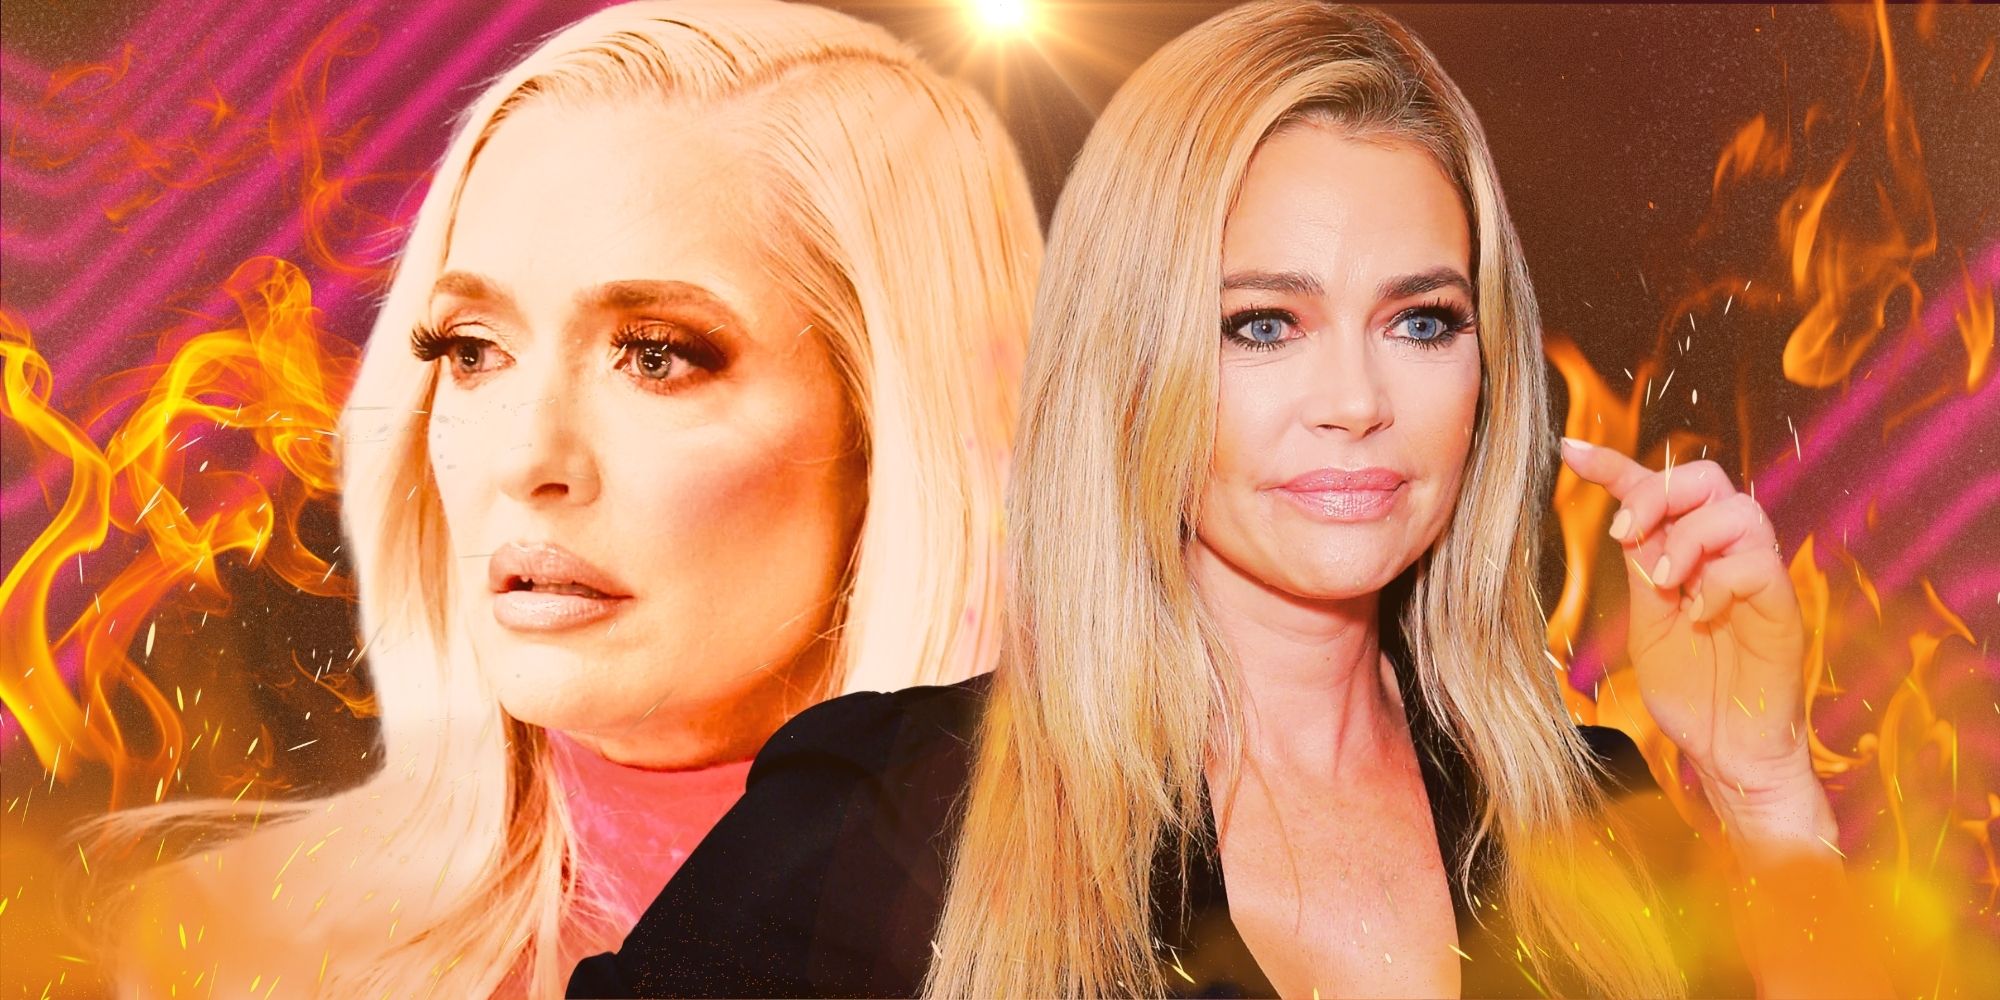 RHOBH's Denise Richards and Erika Jayne with fire